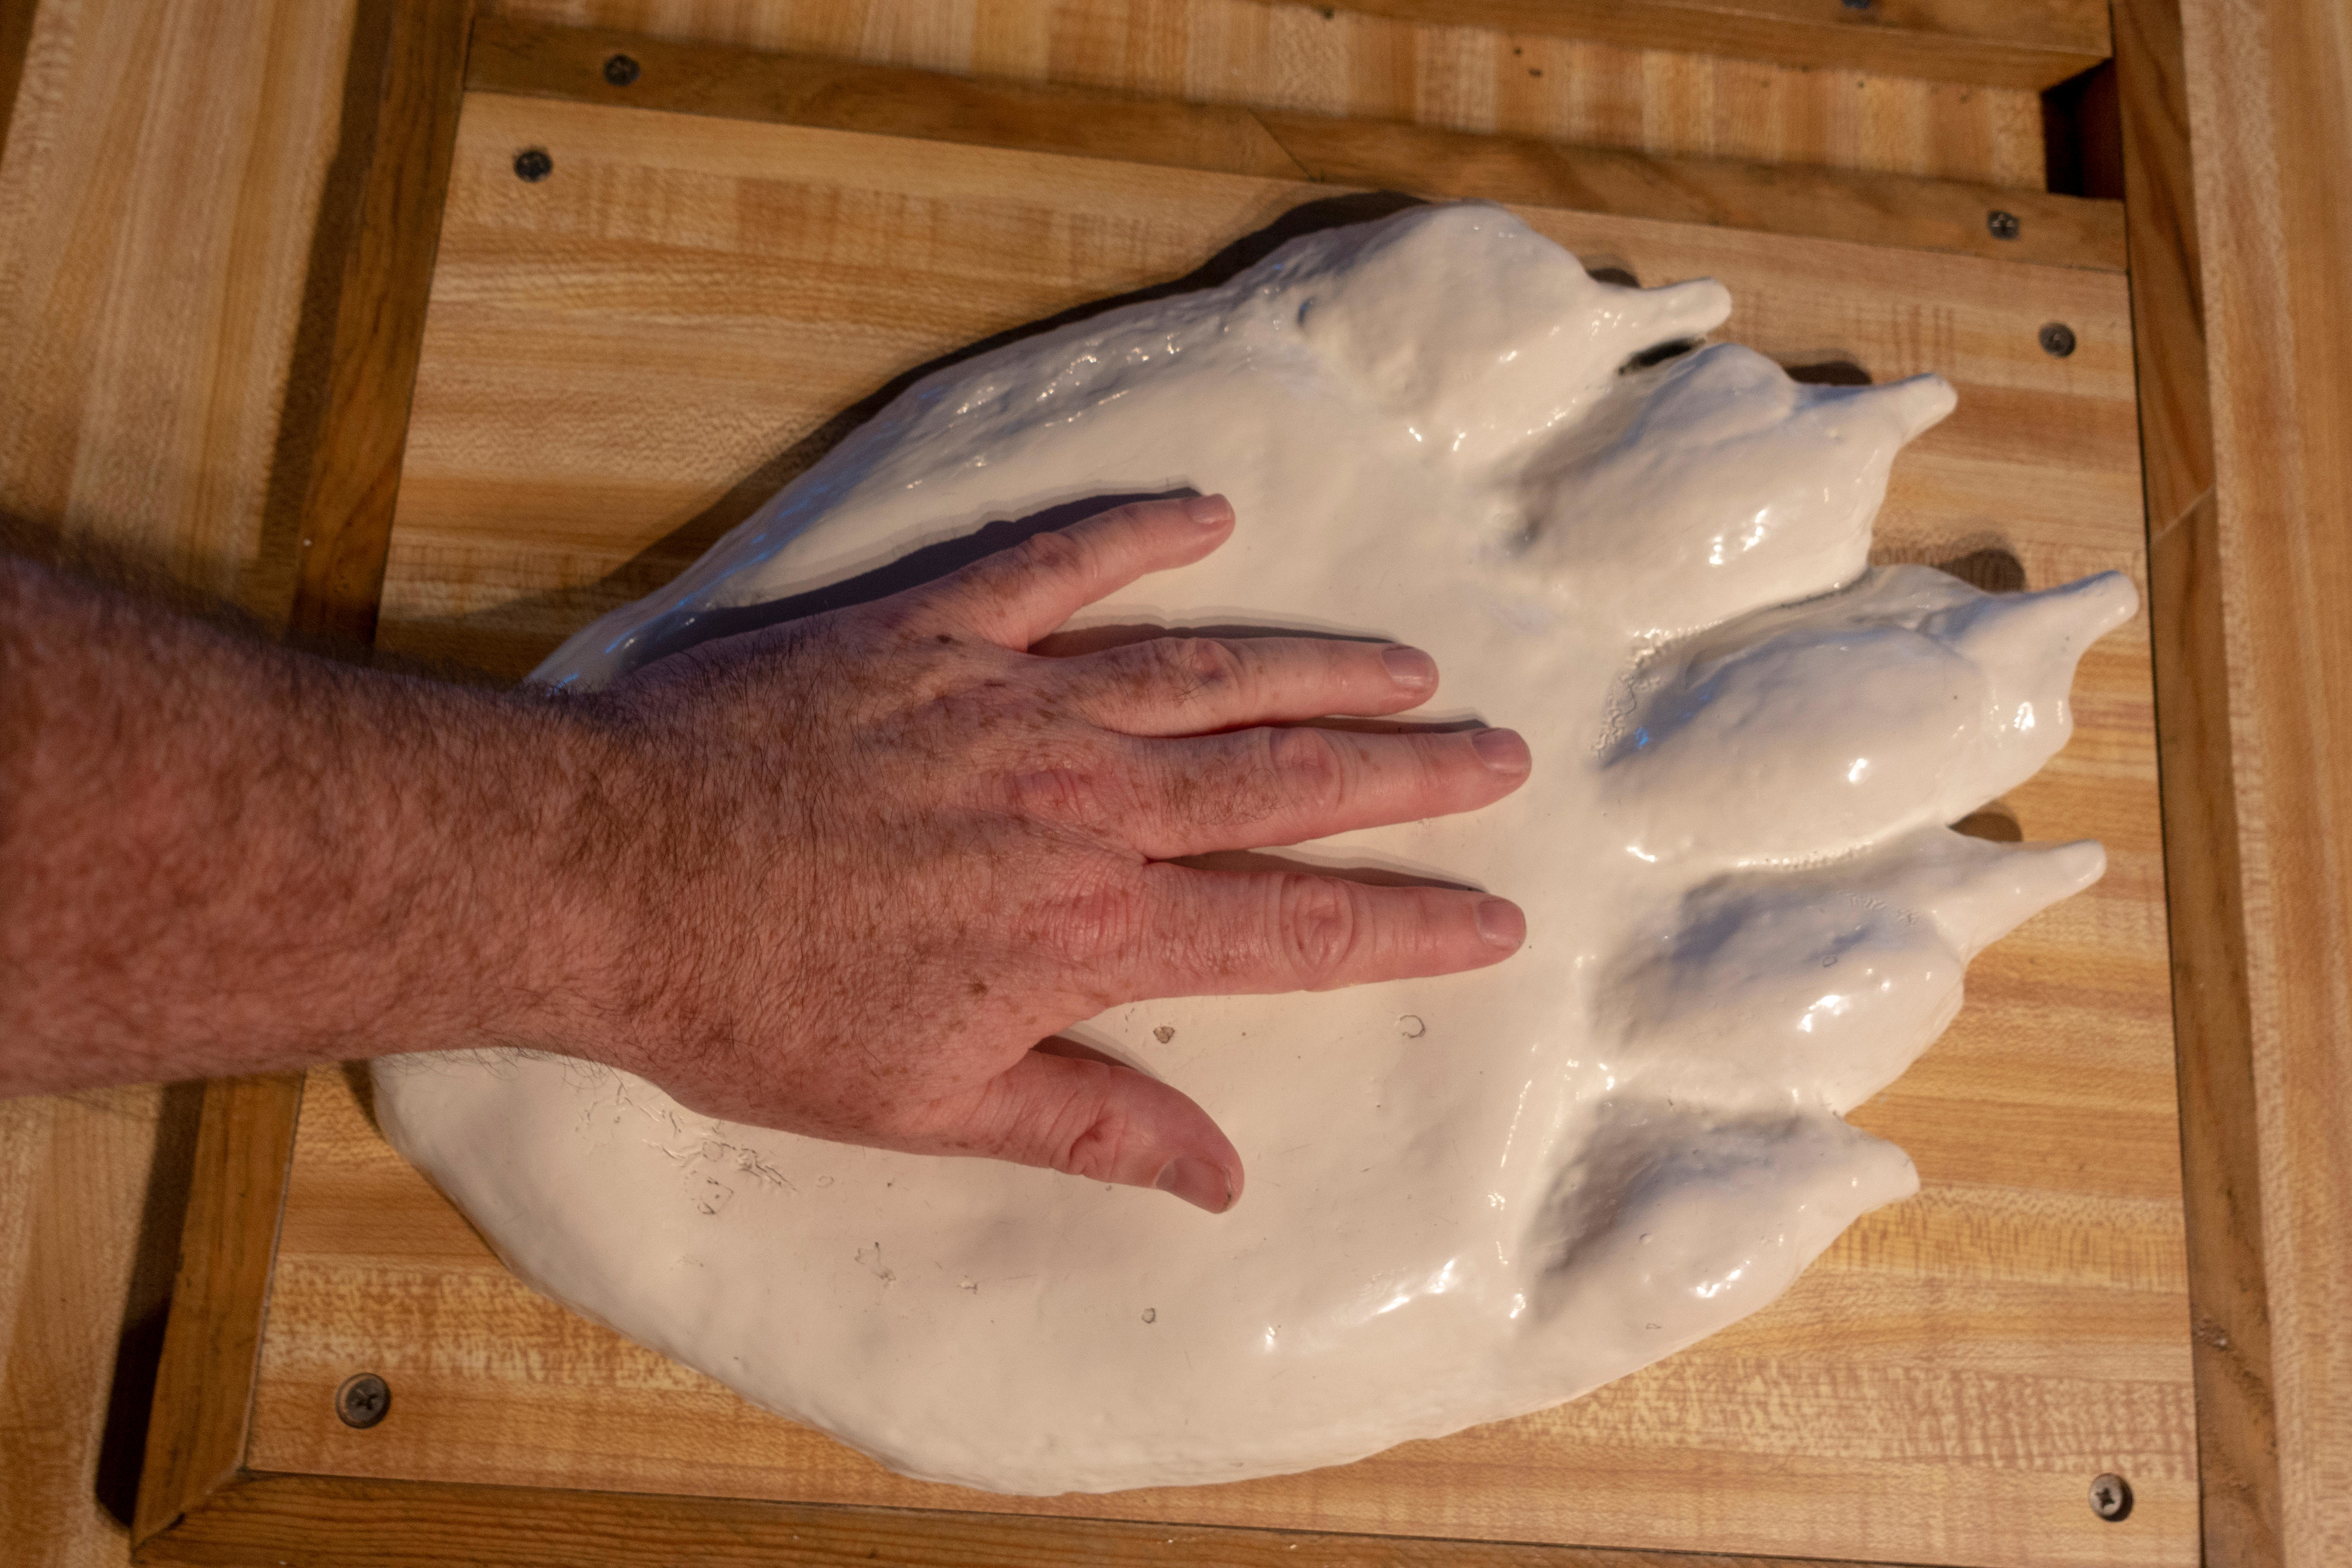 A man&#x27;s hand on top of the impression of a much larger bear footprint